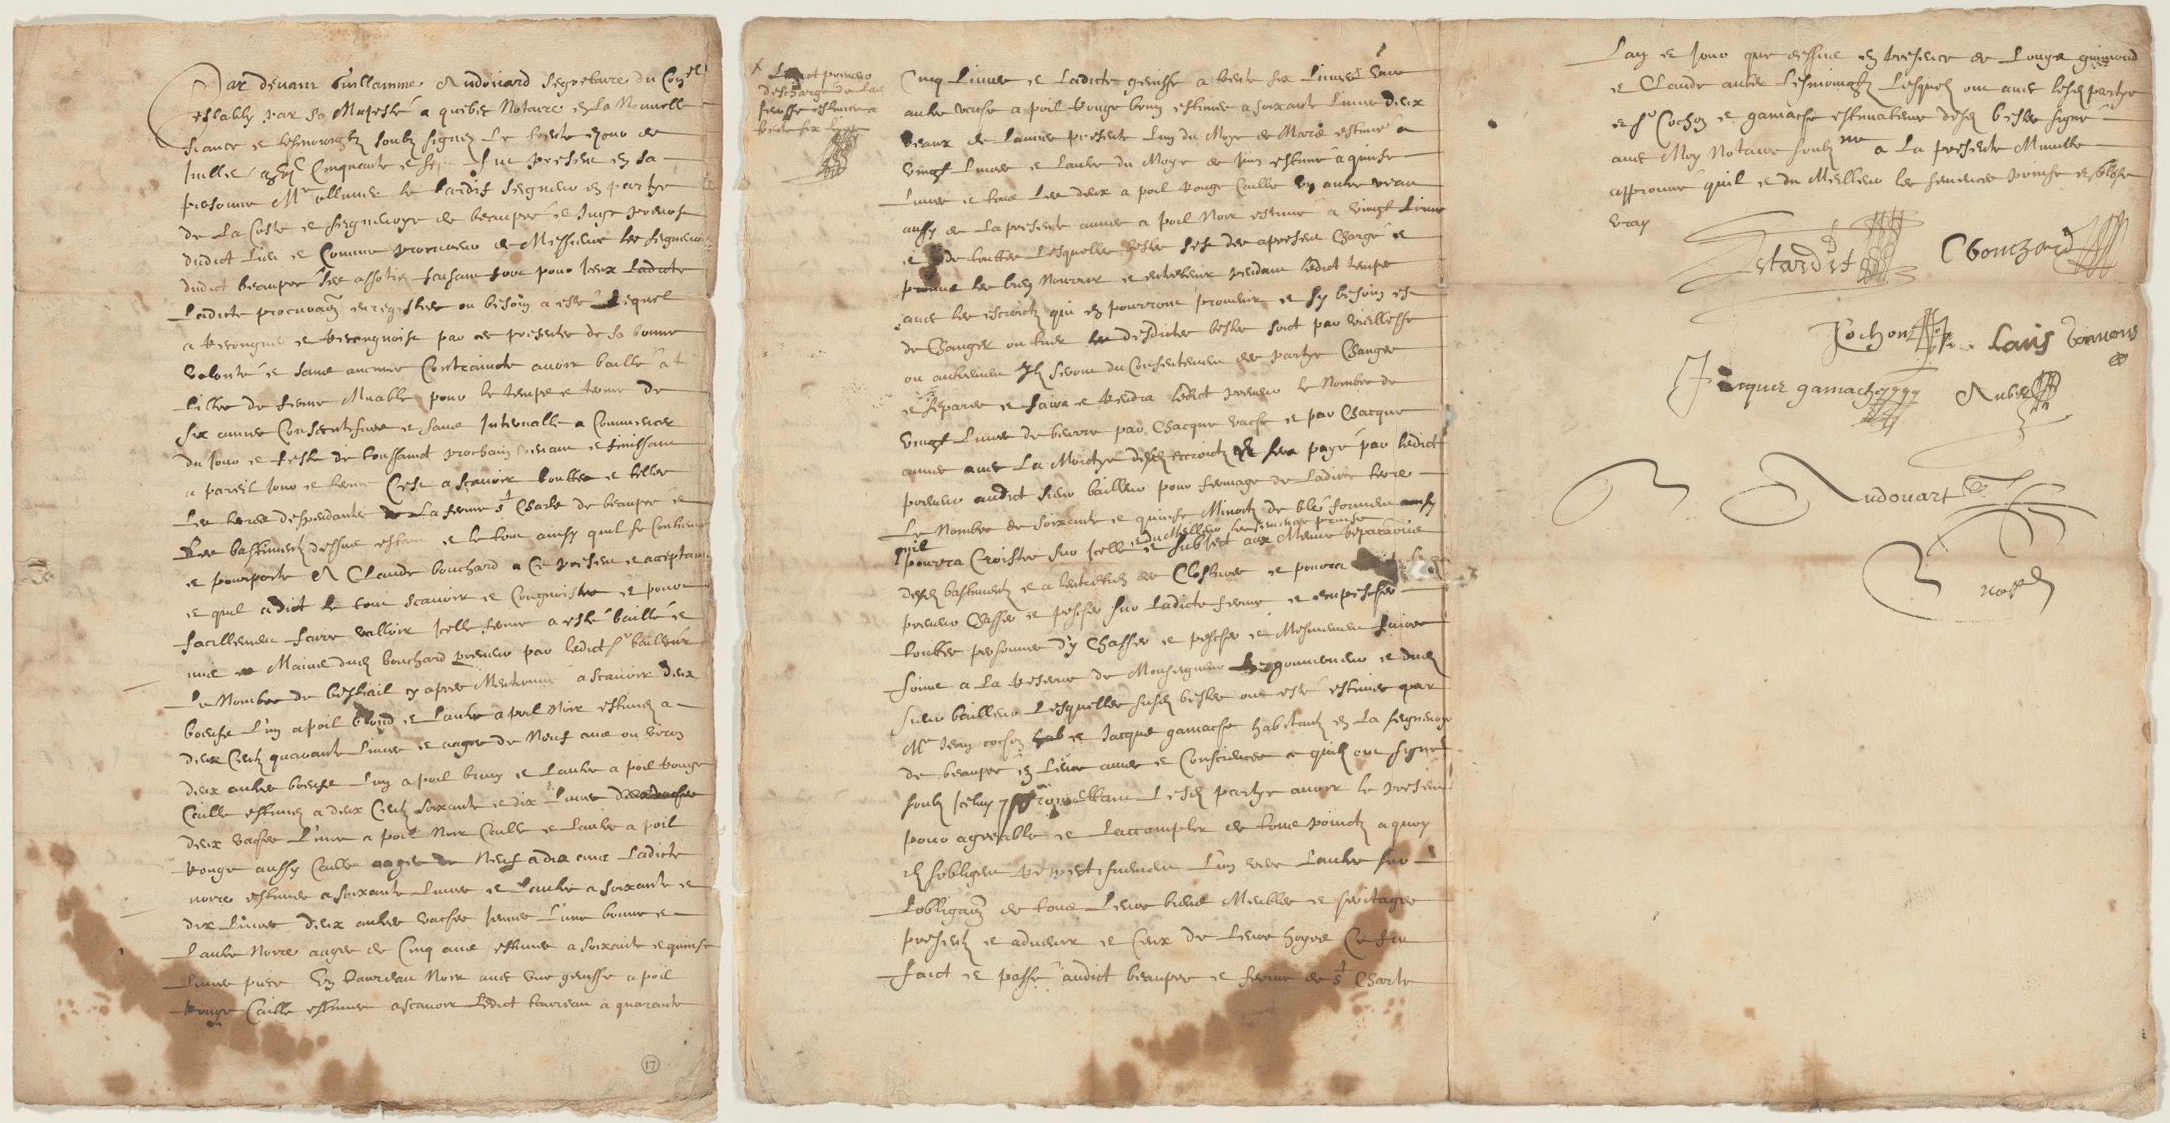 Three-page archival manuscript document describing the lease of a land concession to Claude Bouchard by Olivier Letardif. The text, penned in ink, contains a number of signatures at the bottom. The paper itself is yellowed and stained in places.